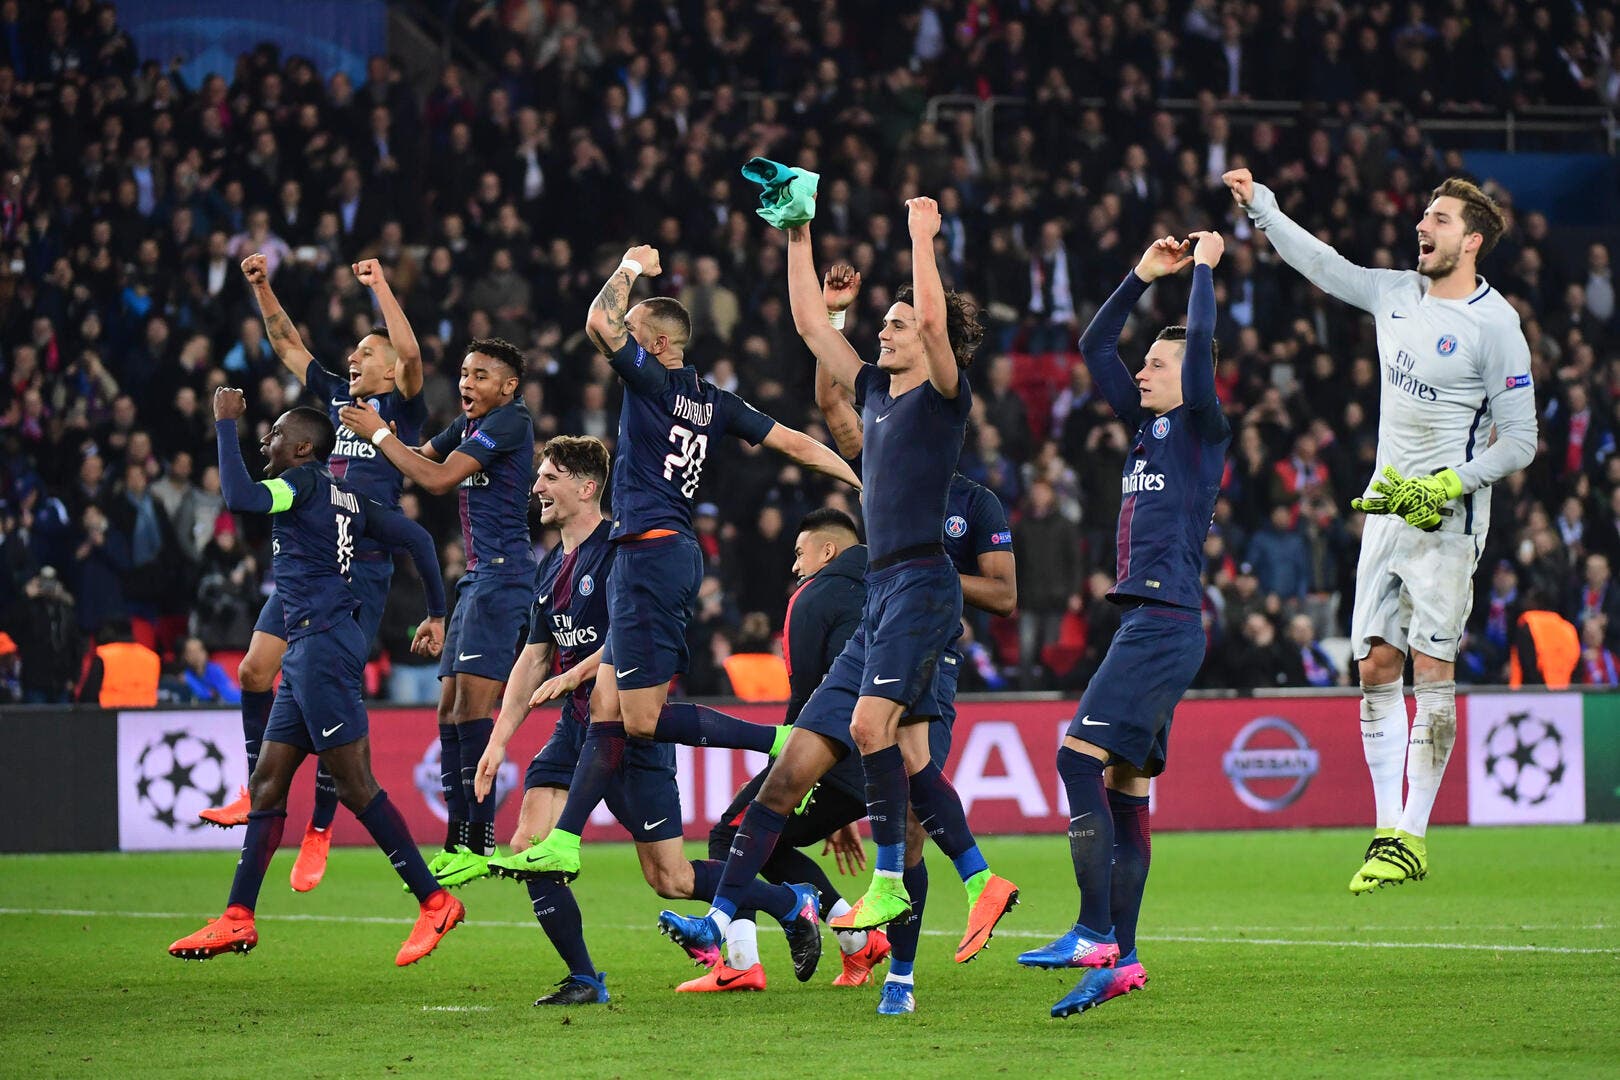 Psg Today Match Photos : The french forward once again scored against